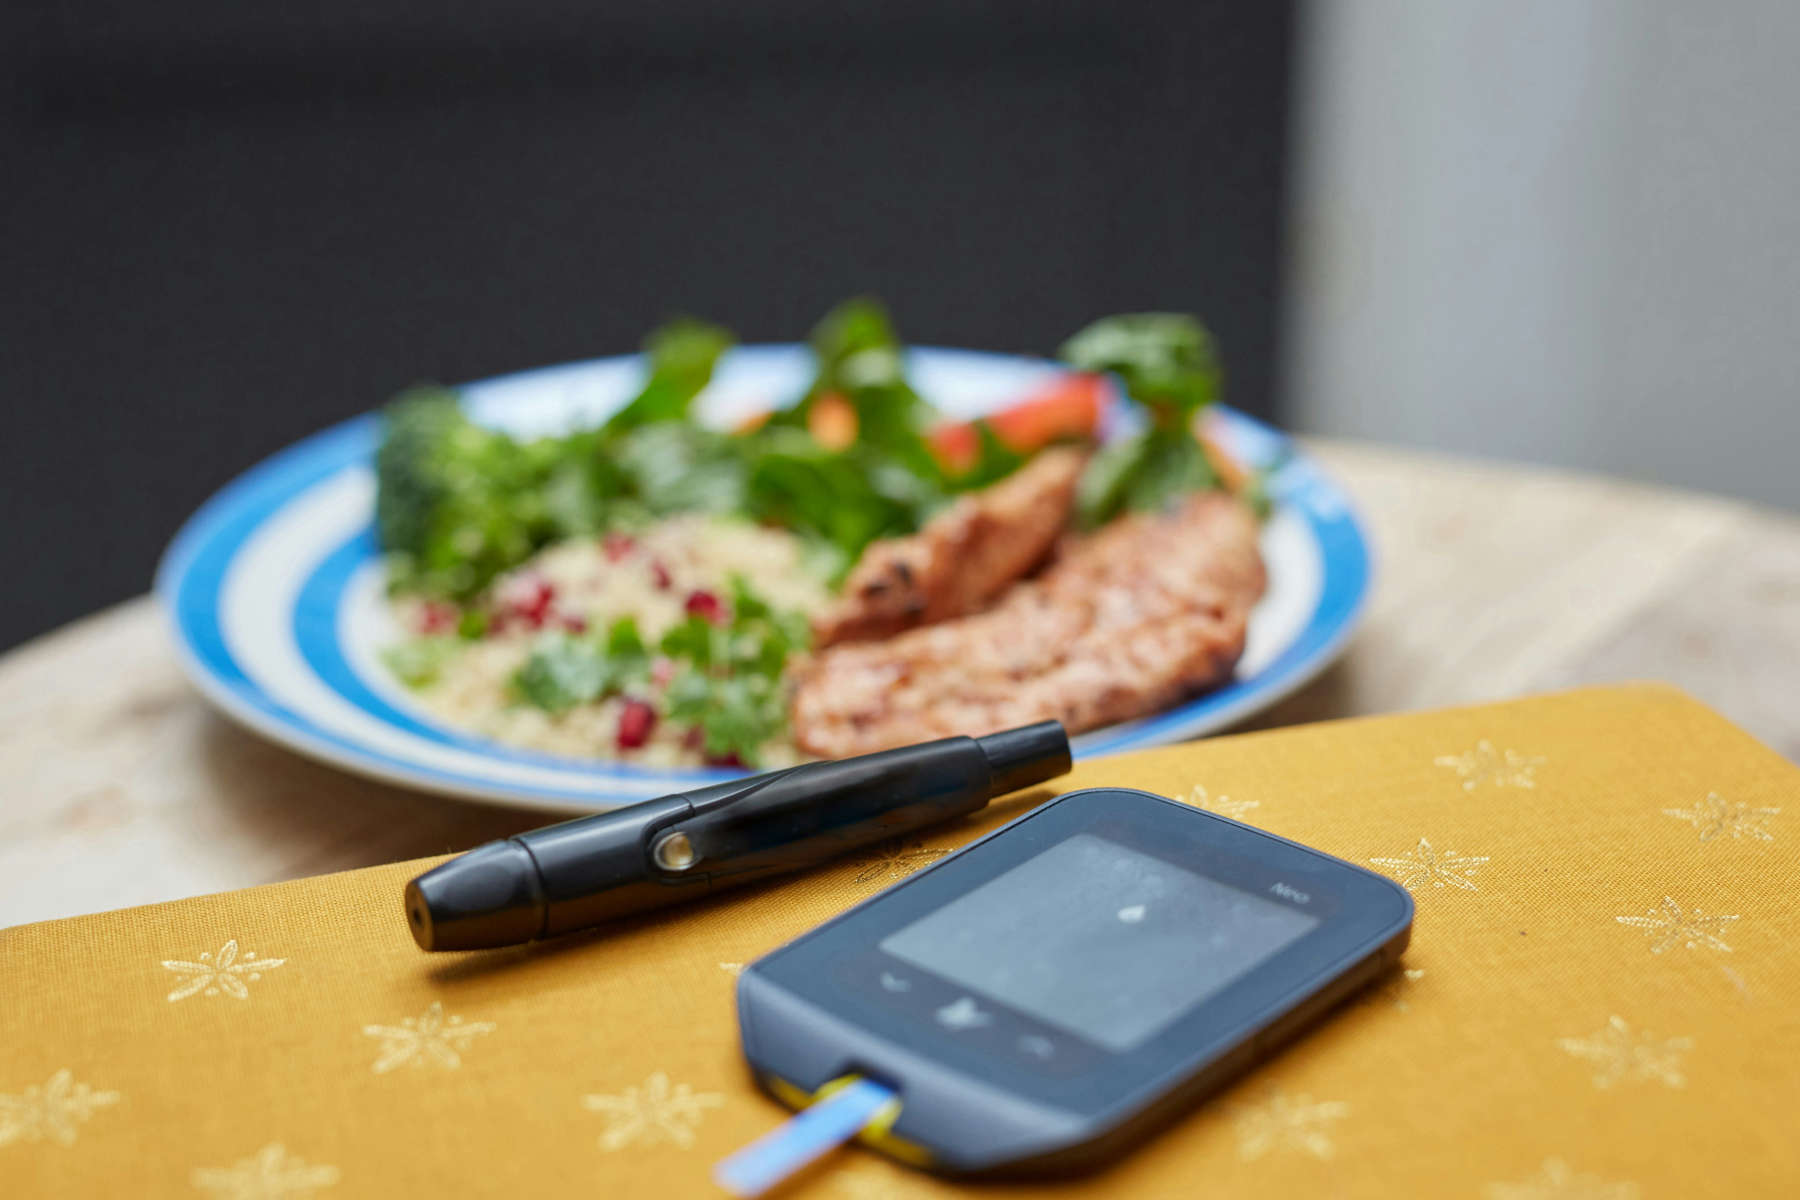 photo of a glucose monitor on a notebook. Healthy meal in the background